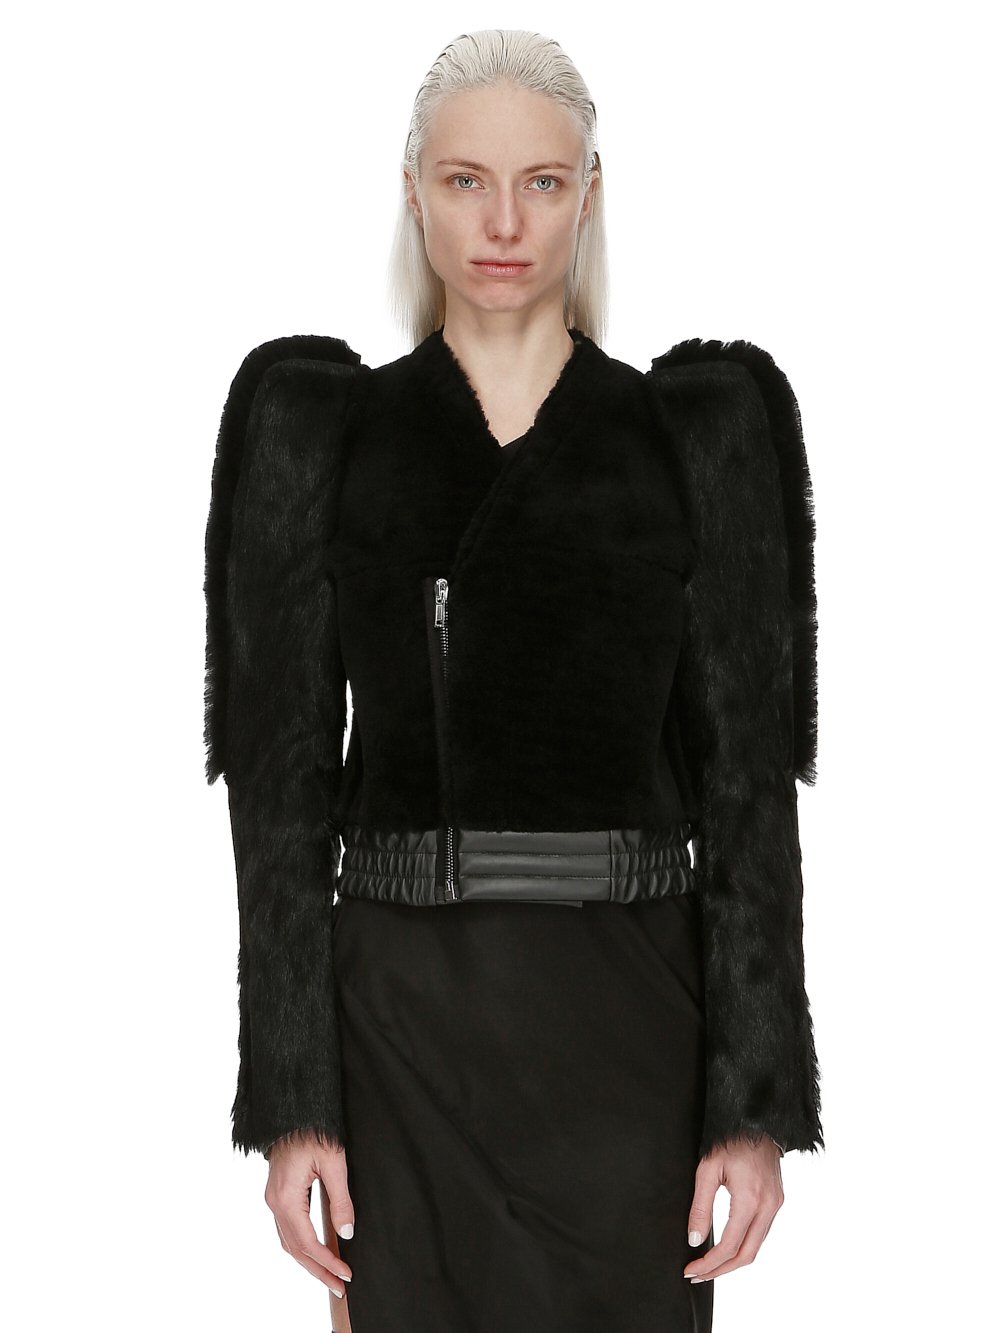 RICK OWENS FW23 LUXOR ZIONIC FLANGED BOMBER IN  BLACK BUTTER LAMB SHEARLING, LONG HAIR PONY AND GOAT FUR